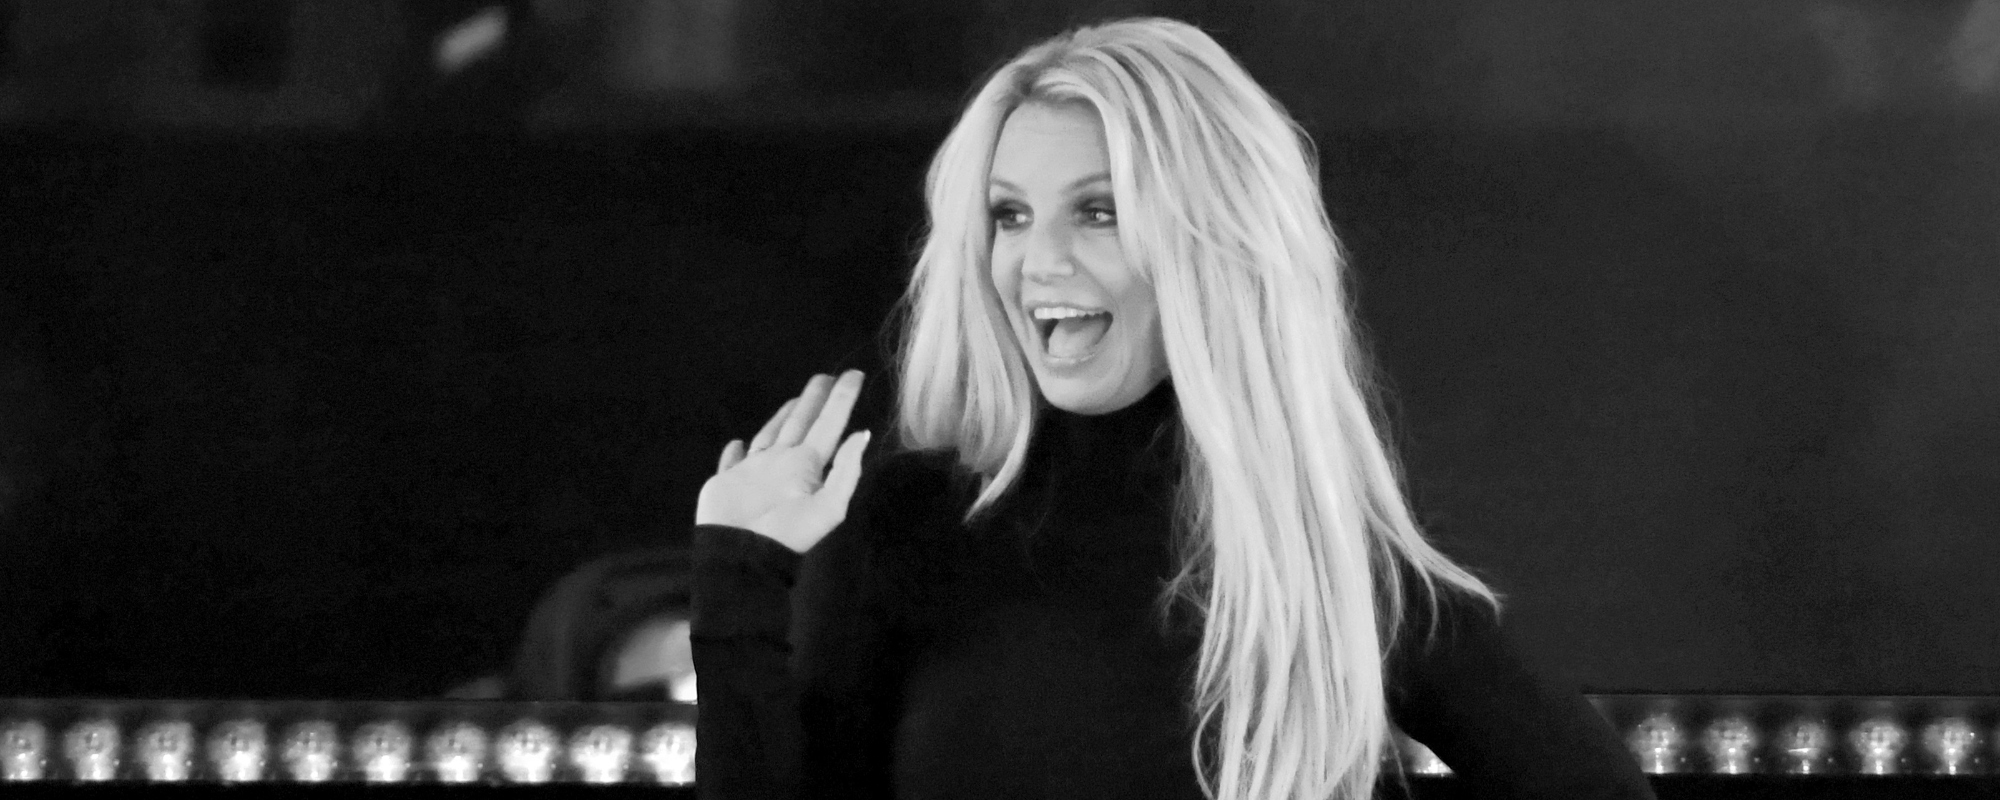 Britney Spears Sets Her Instagram To Private After Telling Justin Timberlake She’s “Deeply Sorry”; Reacts to His ‘SNL’ Performance